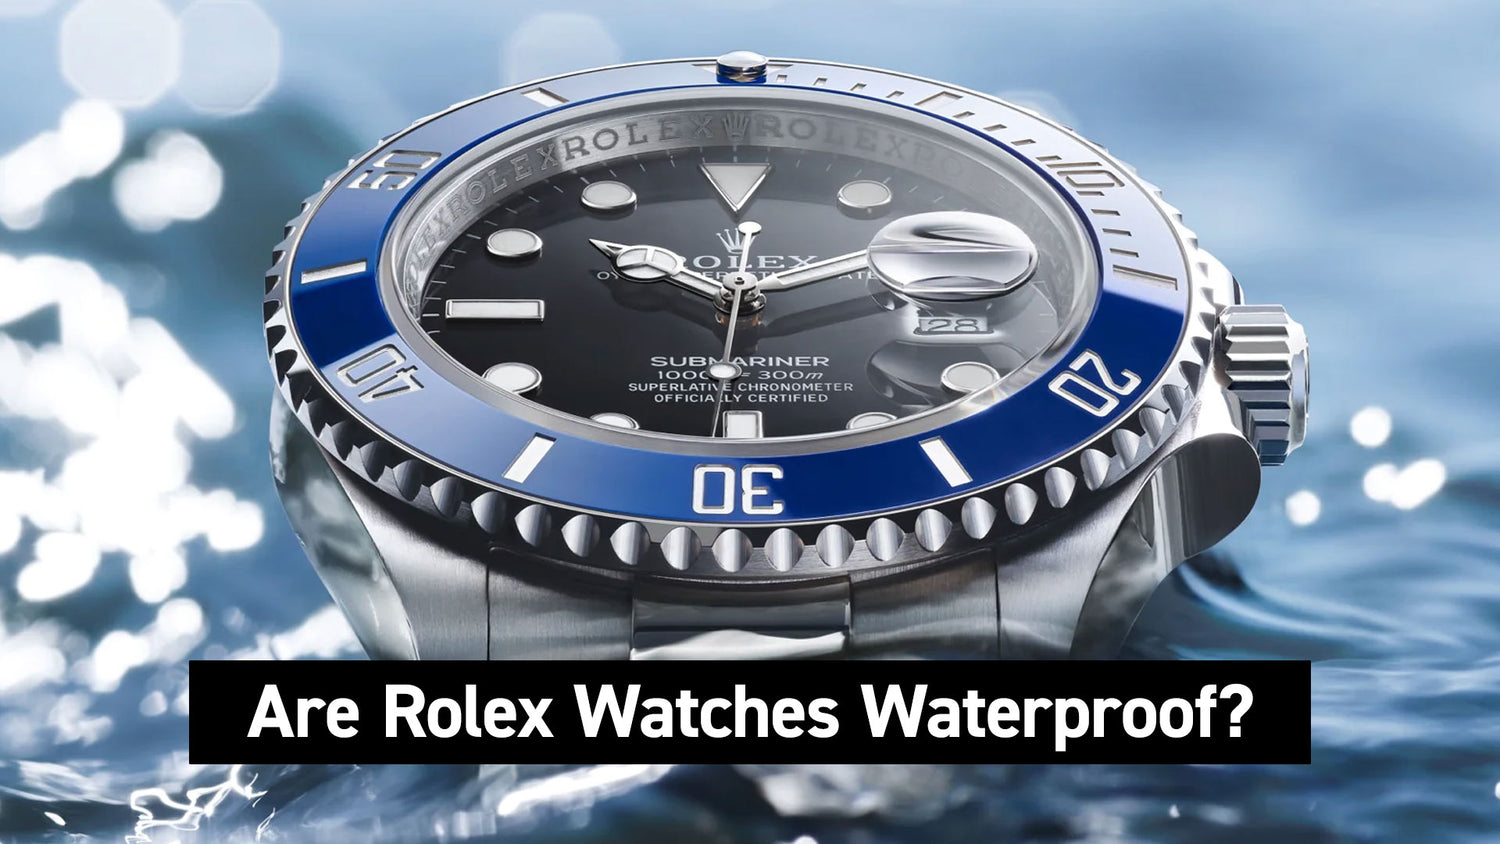 Are Rolex Watches Waterproof?